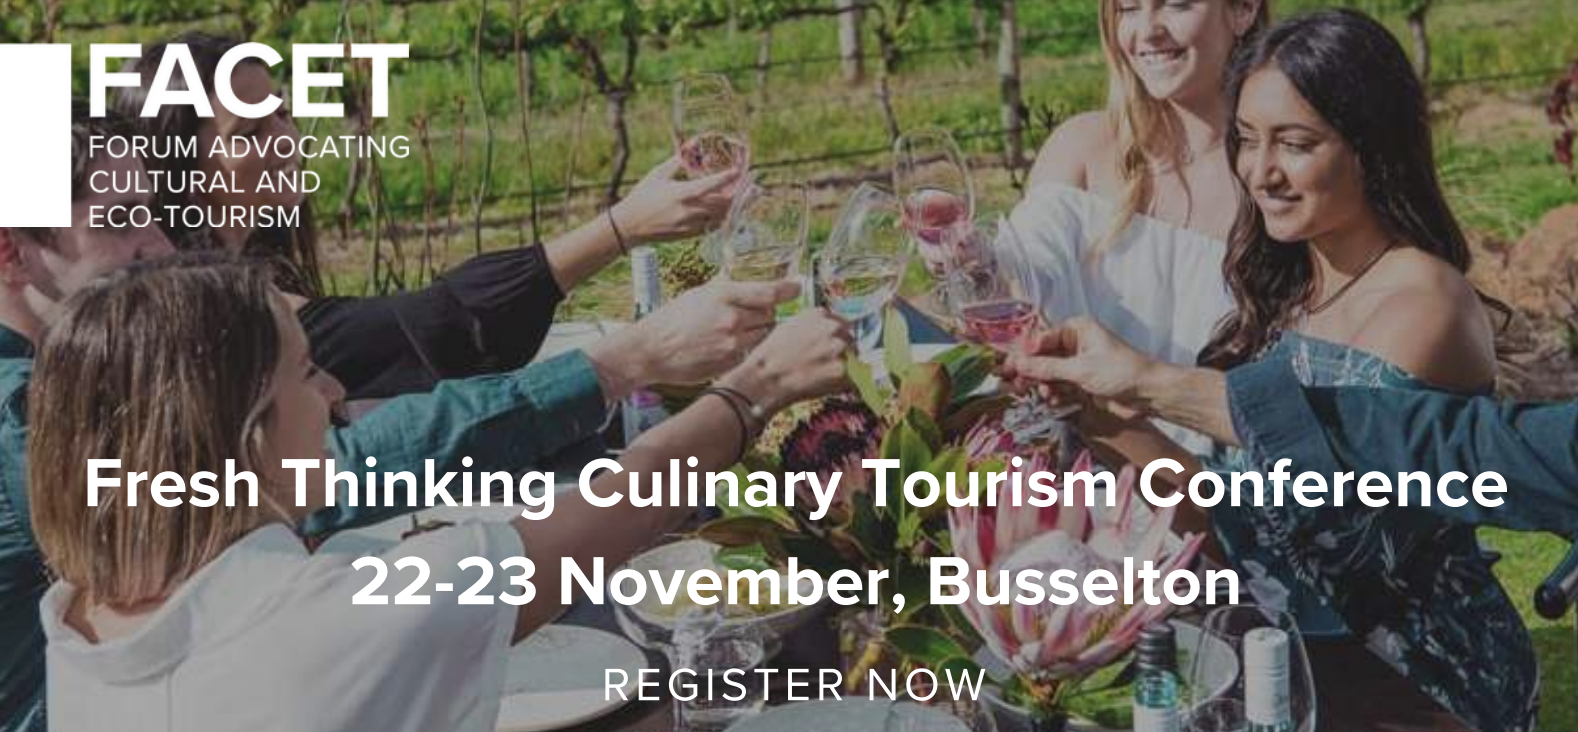 FACET Culinary Tourism Conference Brochure